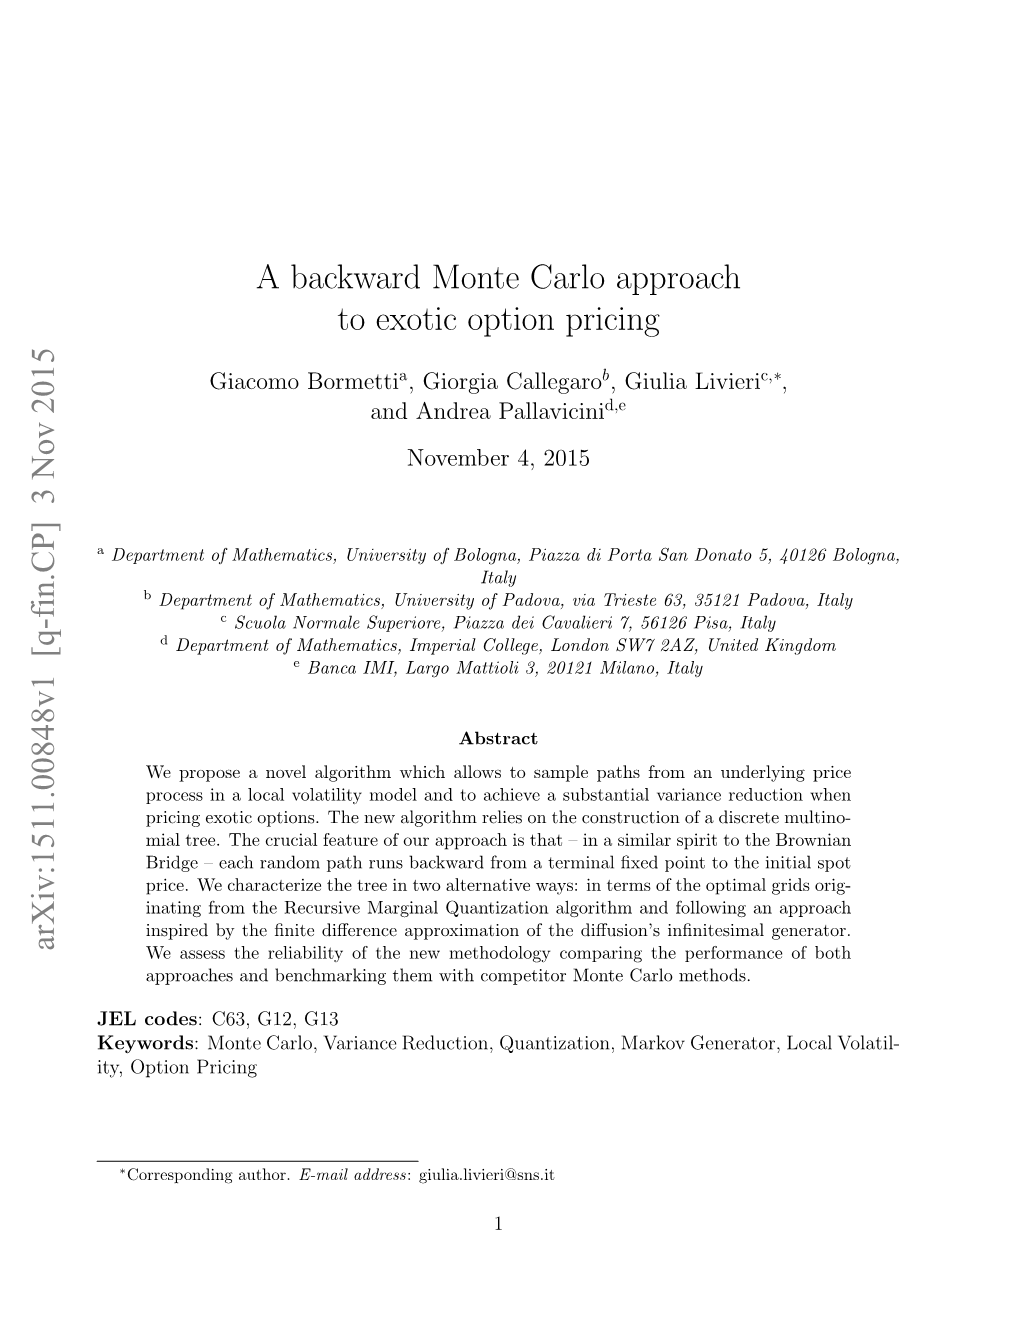 A Backward Monte Carlo Approach to Exotic Option Pricing Arxiv